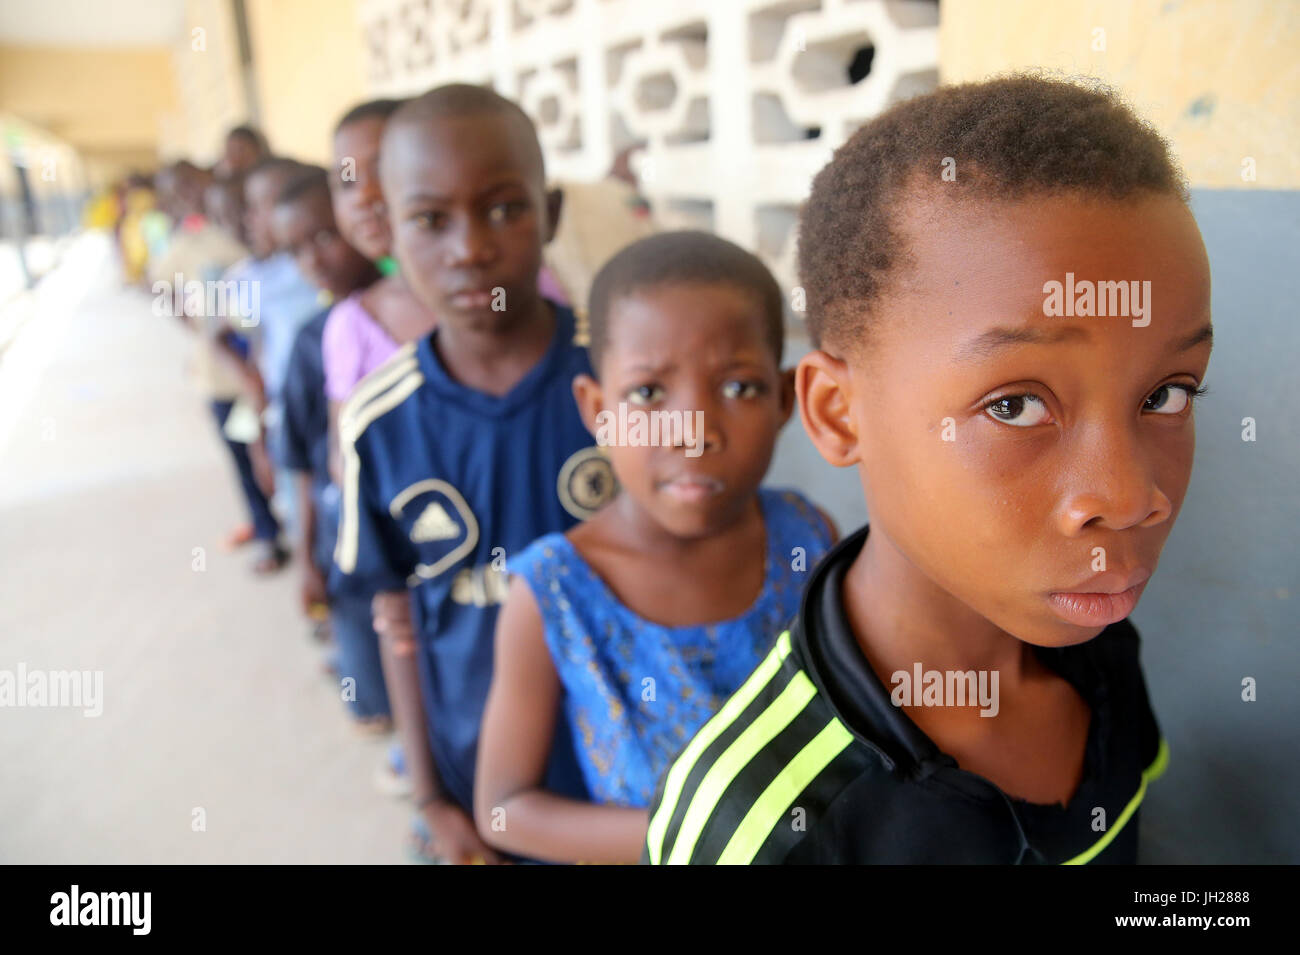 Primary school in Africa. Schoolkids.  Lome. Togo. Stock Photo